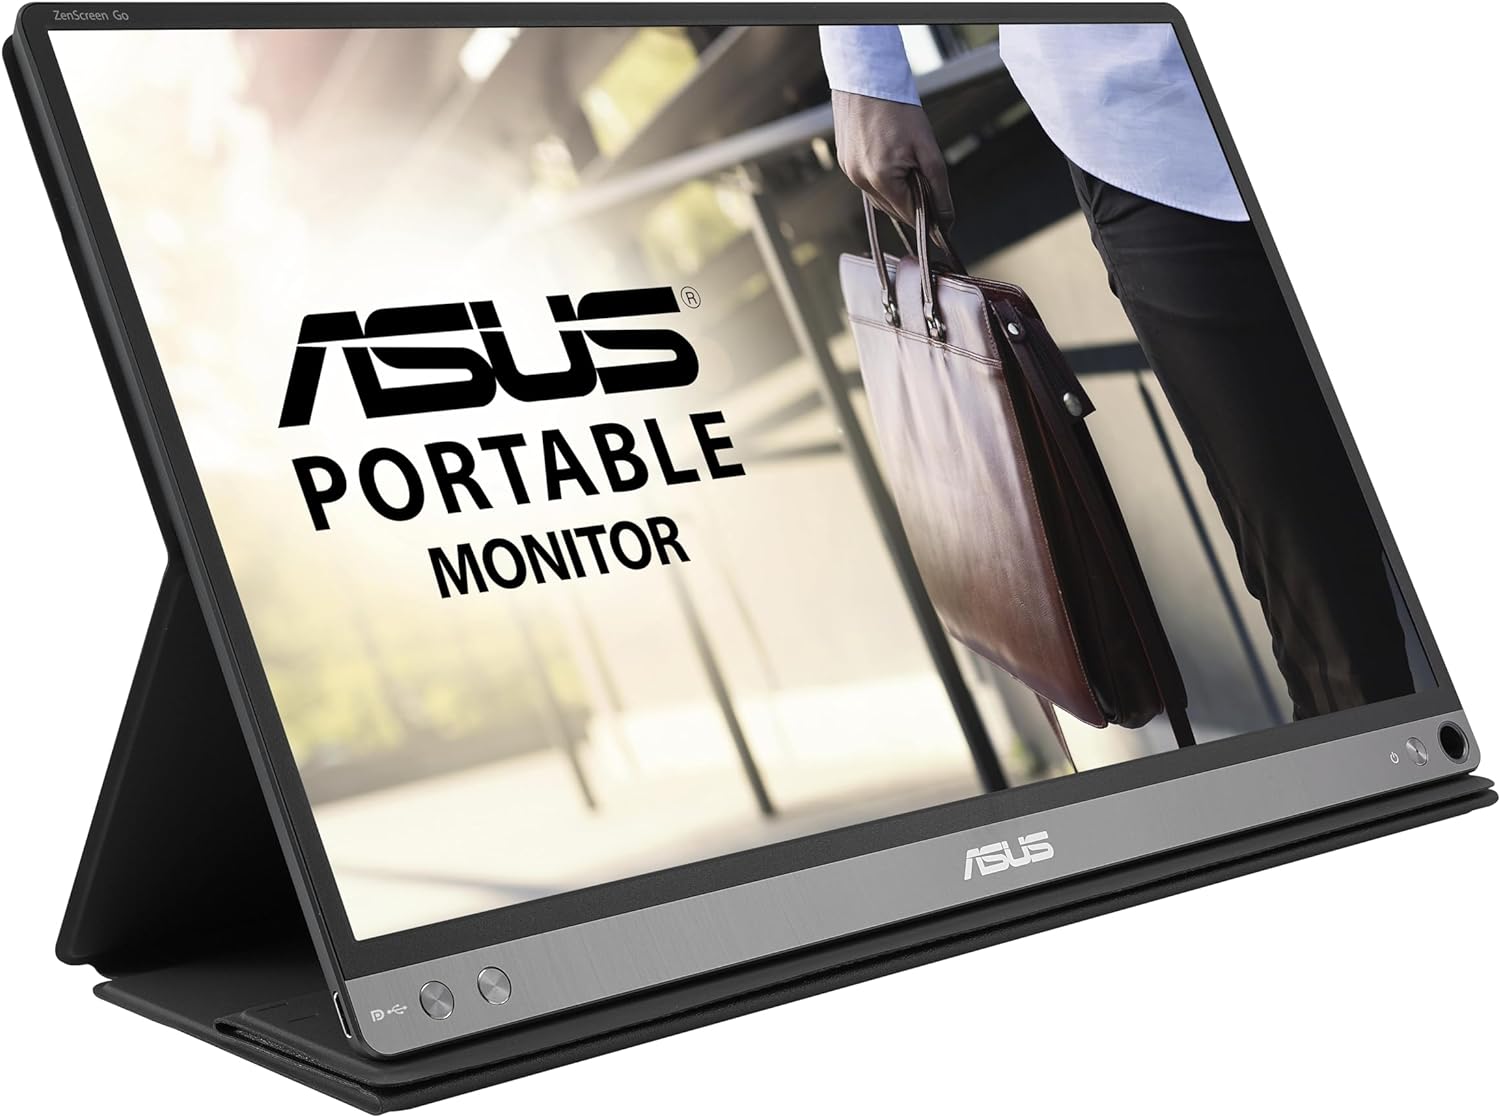 Asus ZenScreen Go 15.0" Portable Monitor with Full HD 1920 x 1080 Resolution